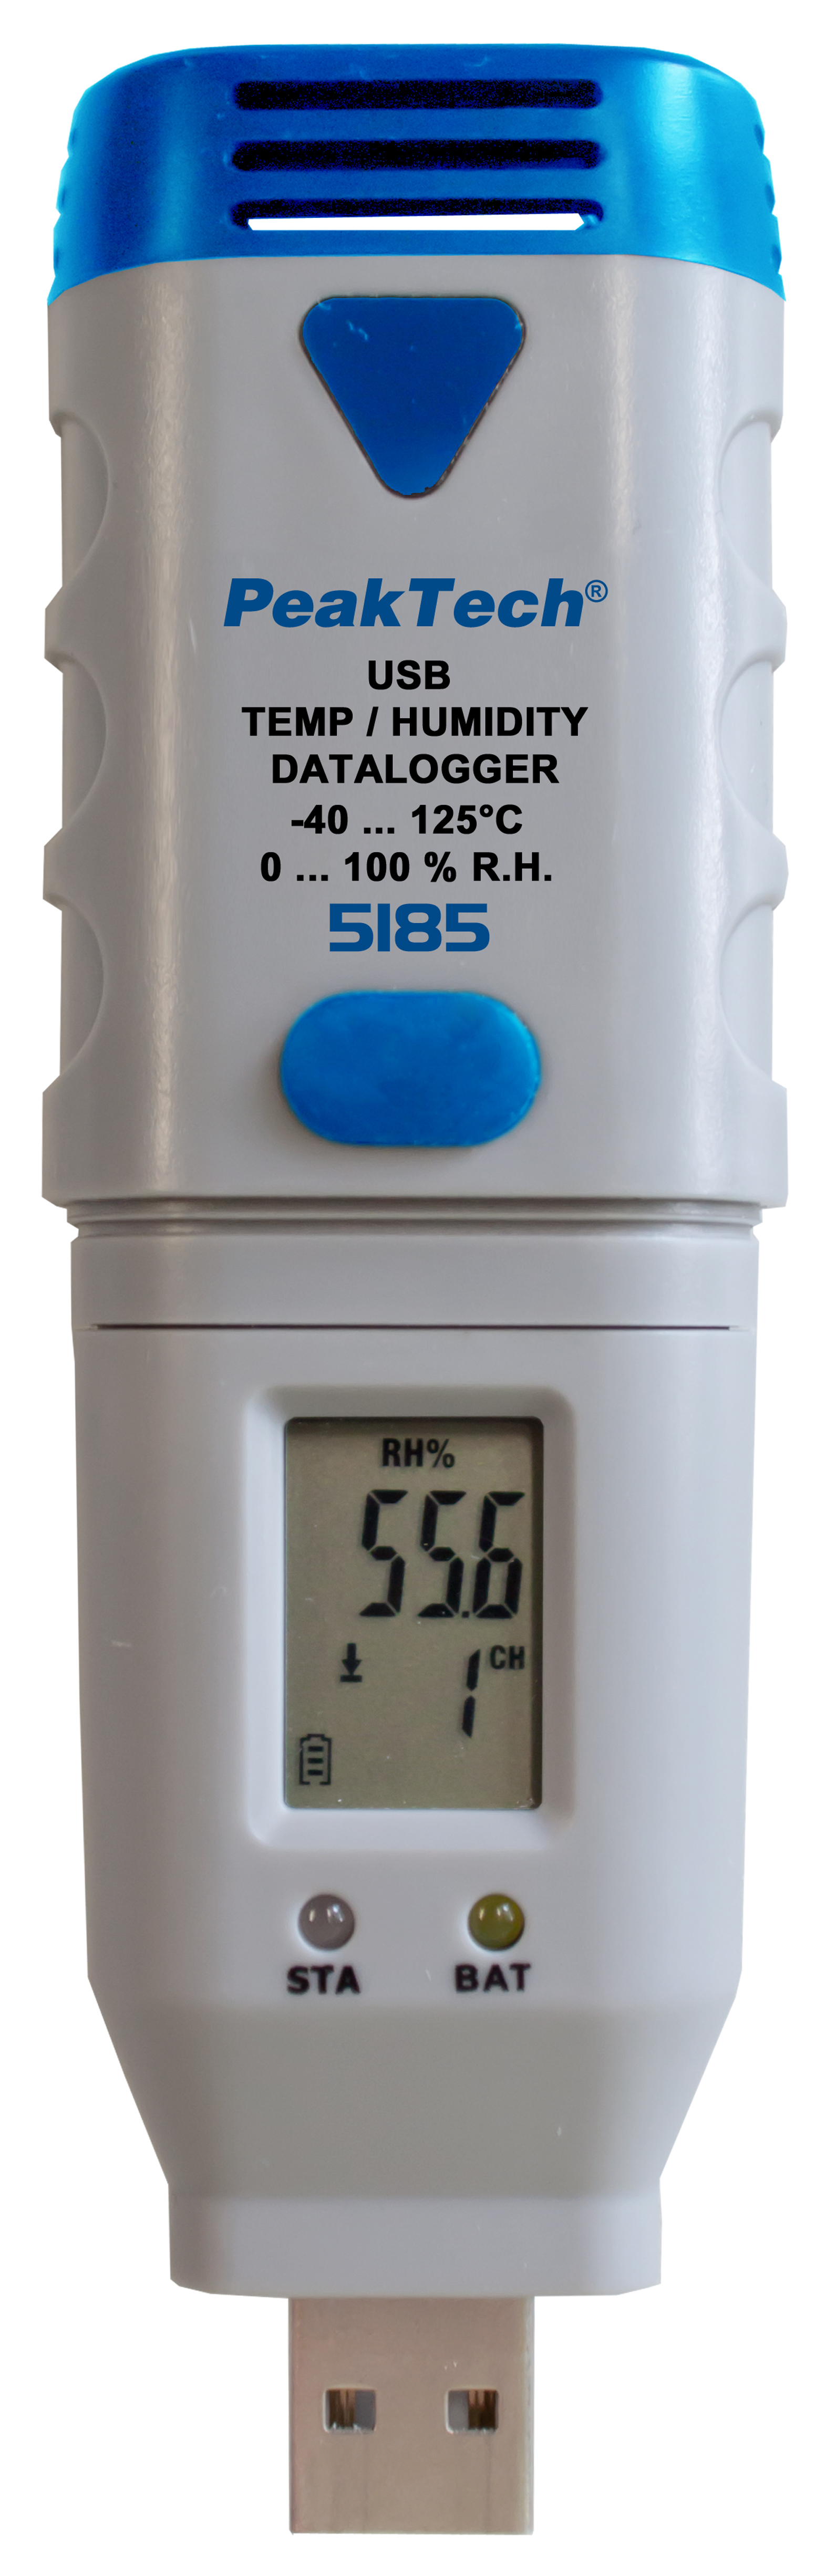 «PeakTech® P 5185» USB-Datalogger Temperature and Humidity